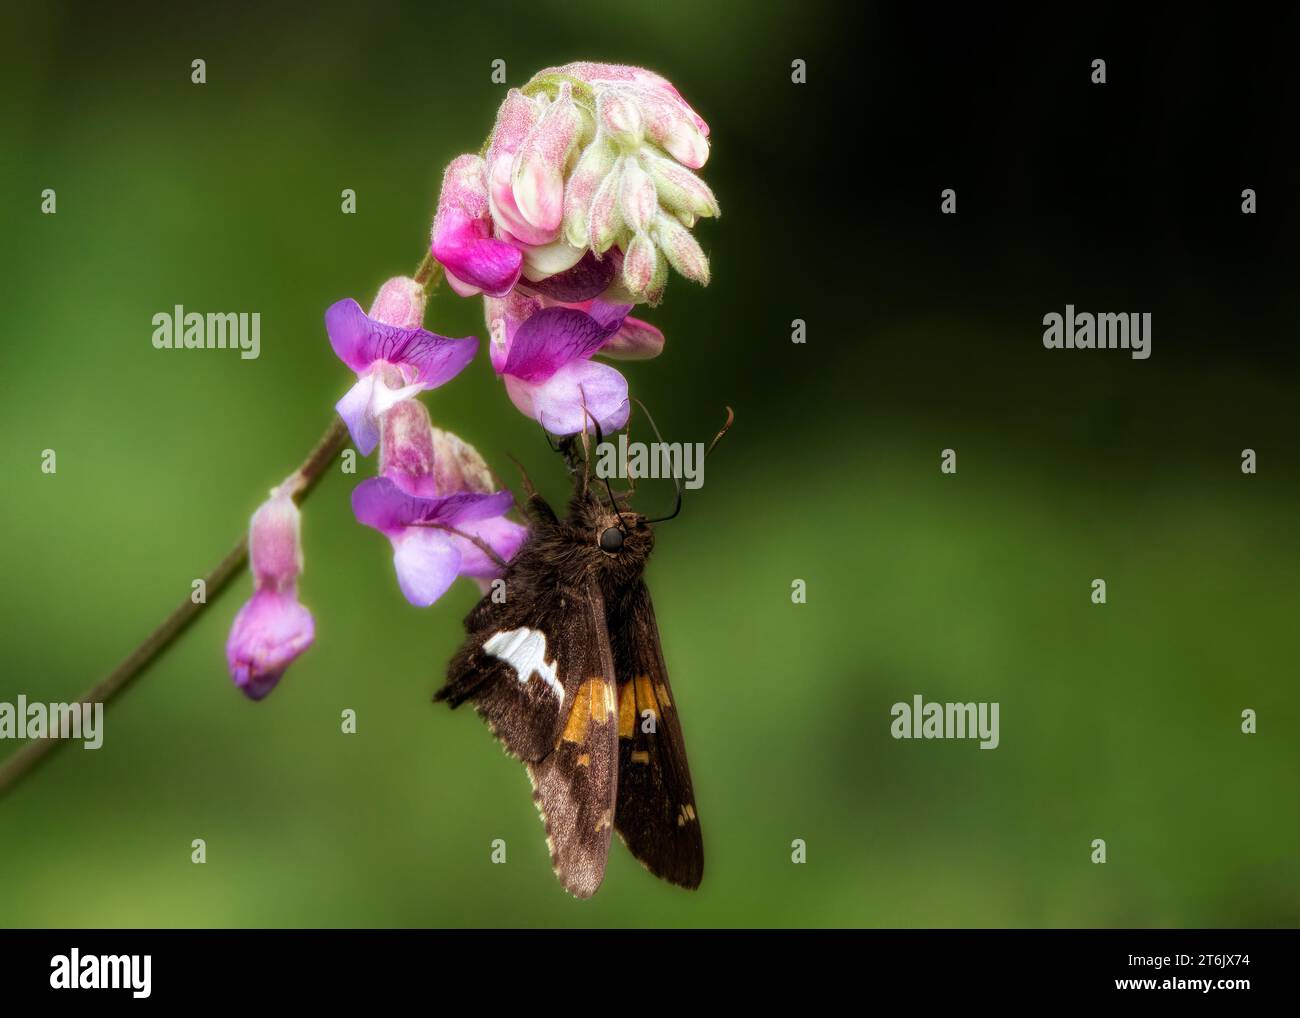 Close up of a moth pollinating an American Vetch (Vicia americana) pink wildflower blossom growing in the Chippewa National Forest, northern Minnesota Stock Photo